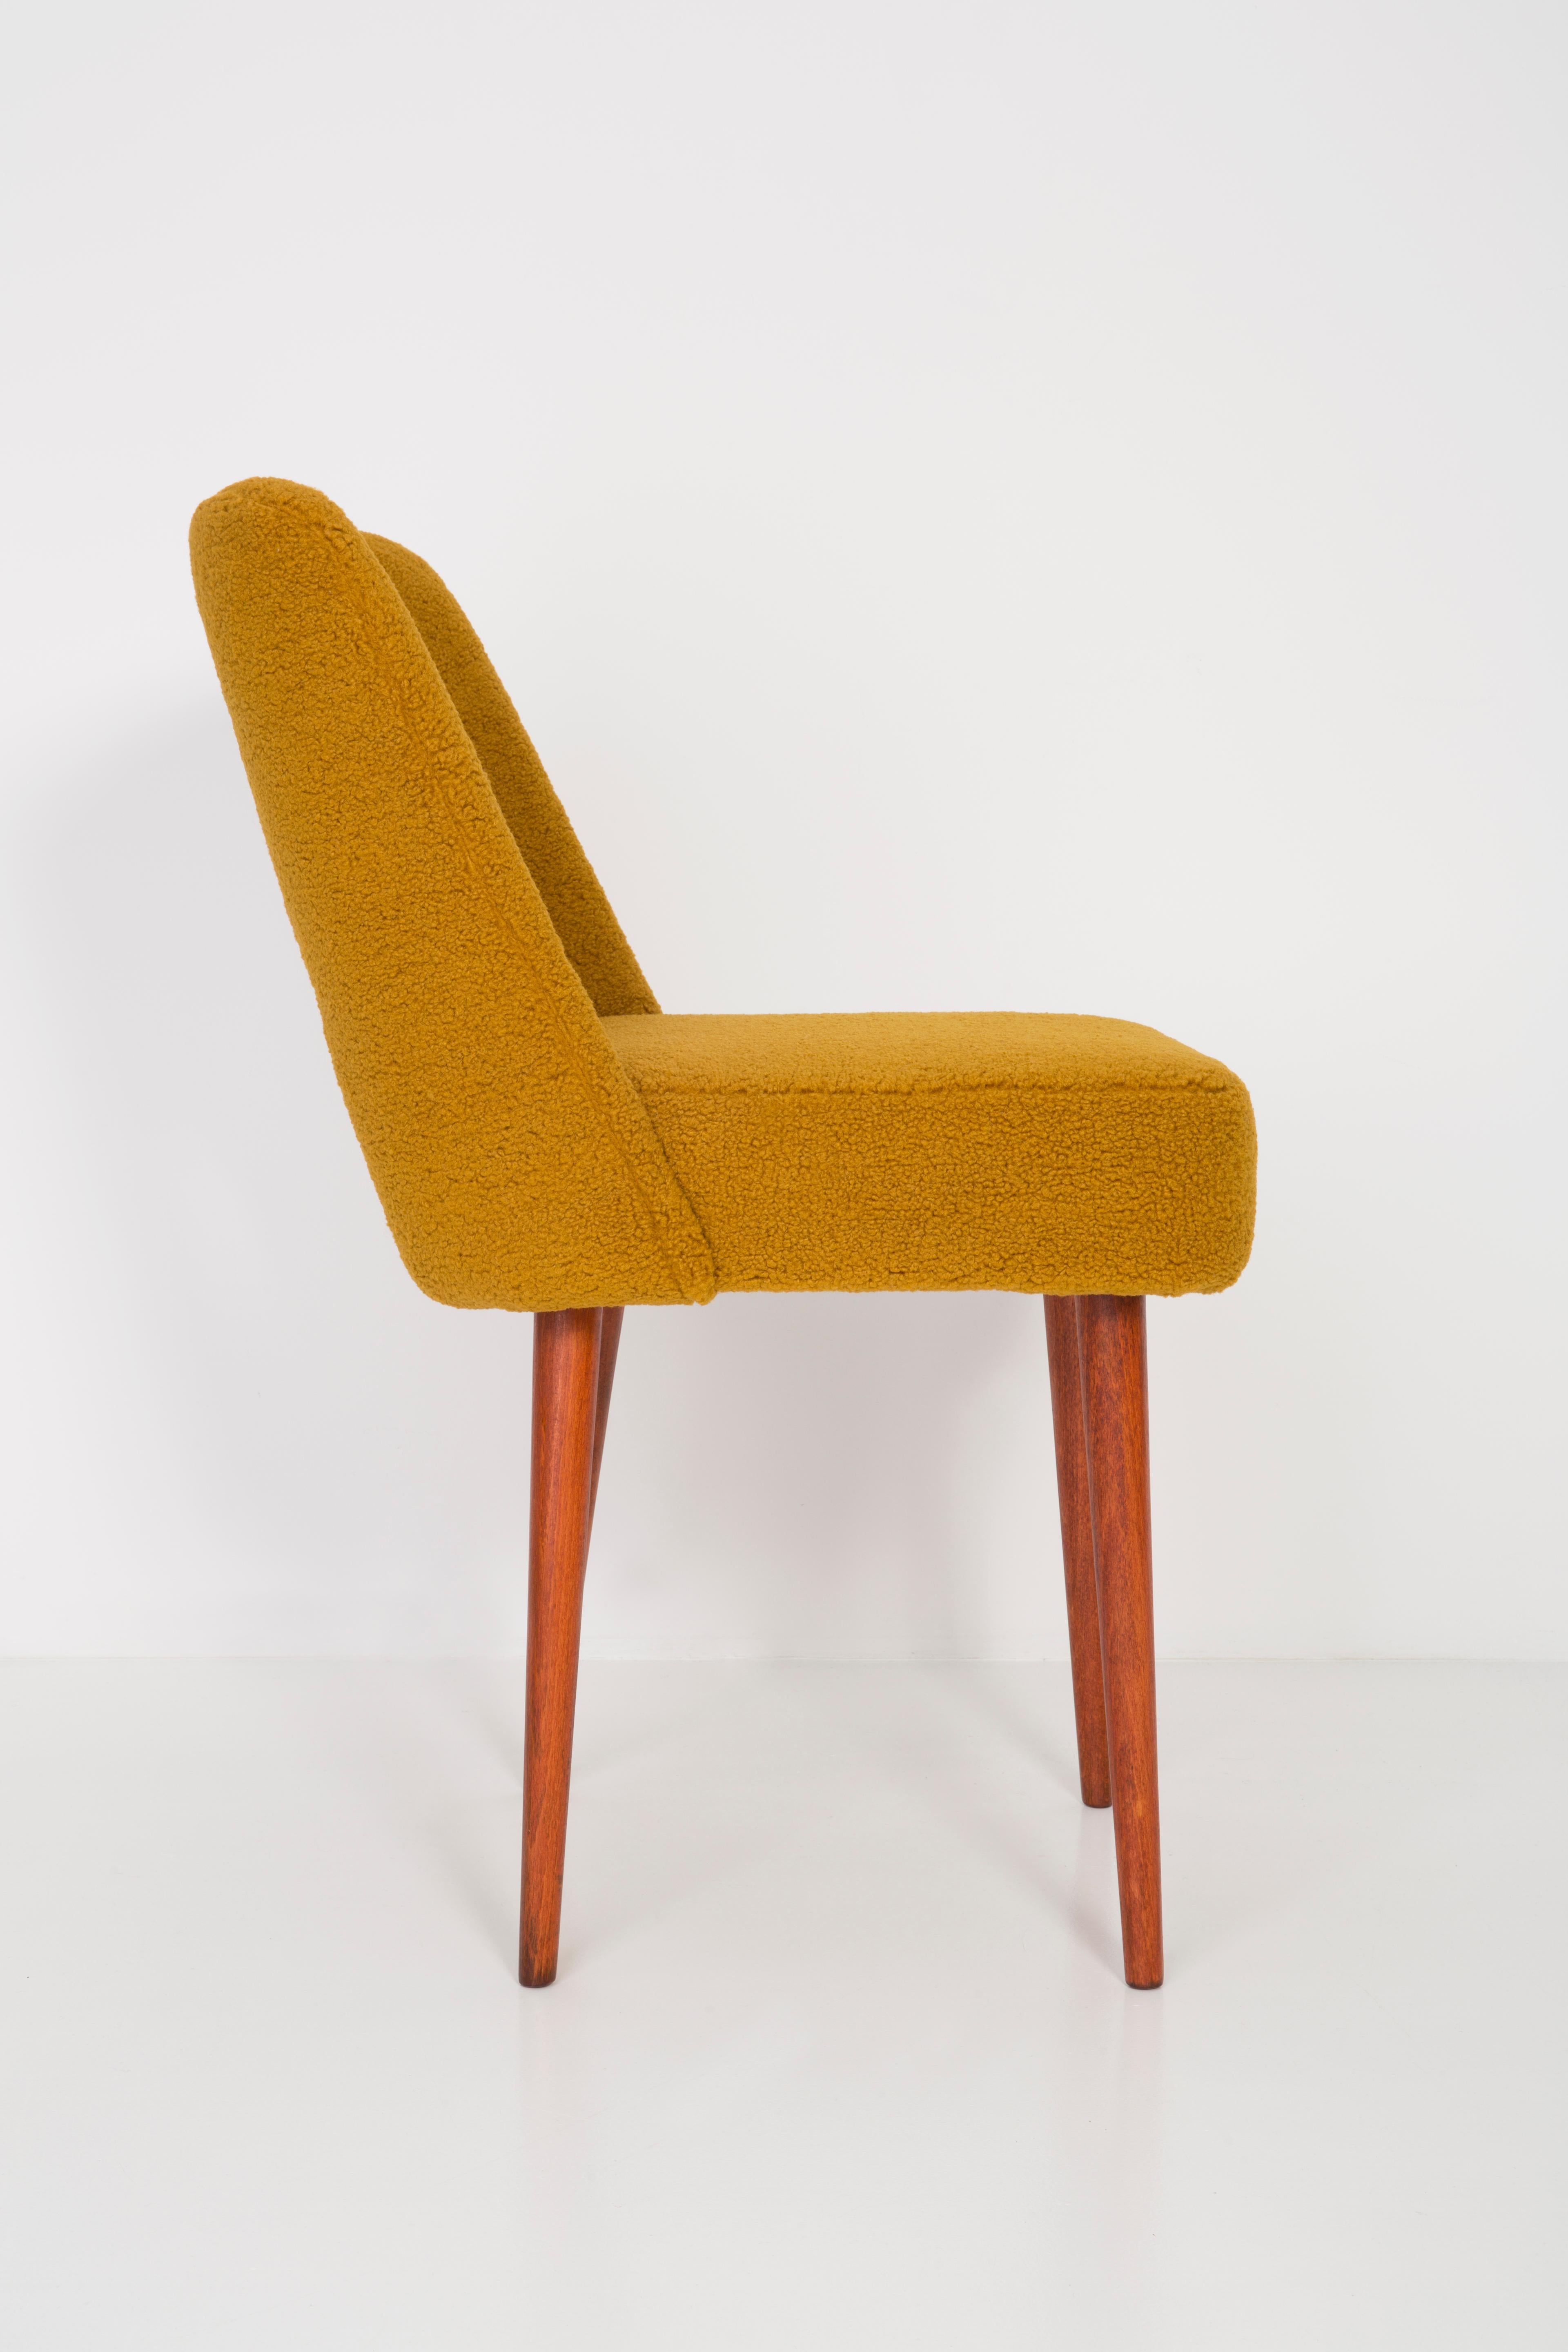 Set of Four Yellow Ochre Boucle 'Shell' Chairs, 1960s For Sale 2